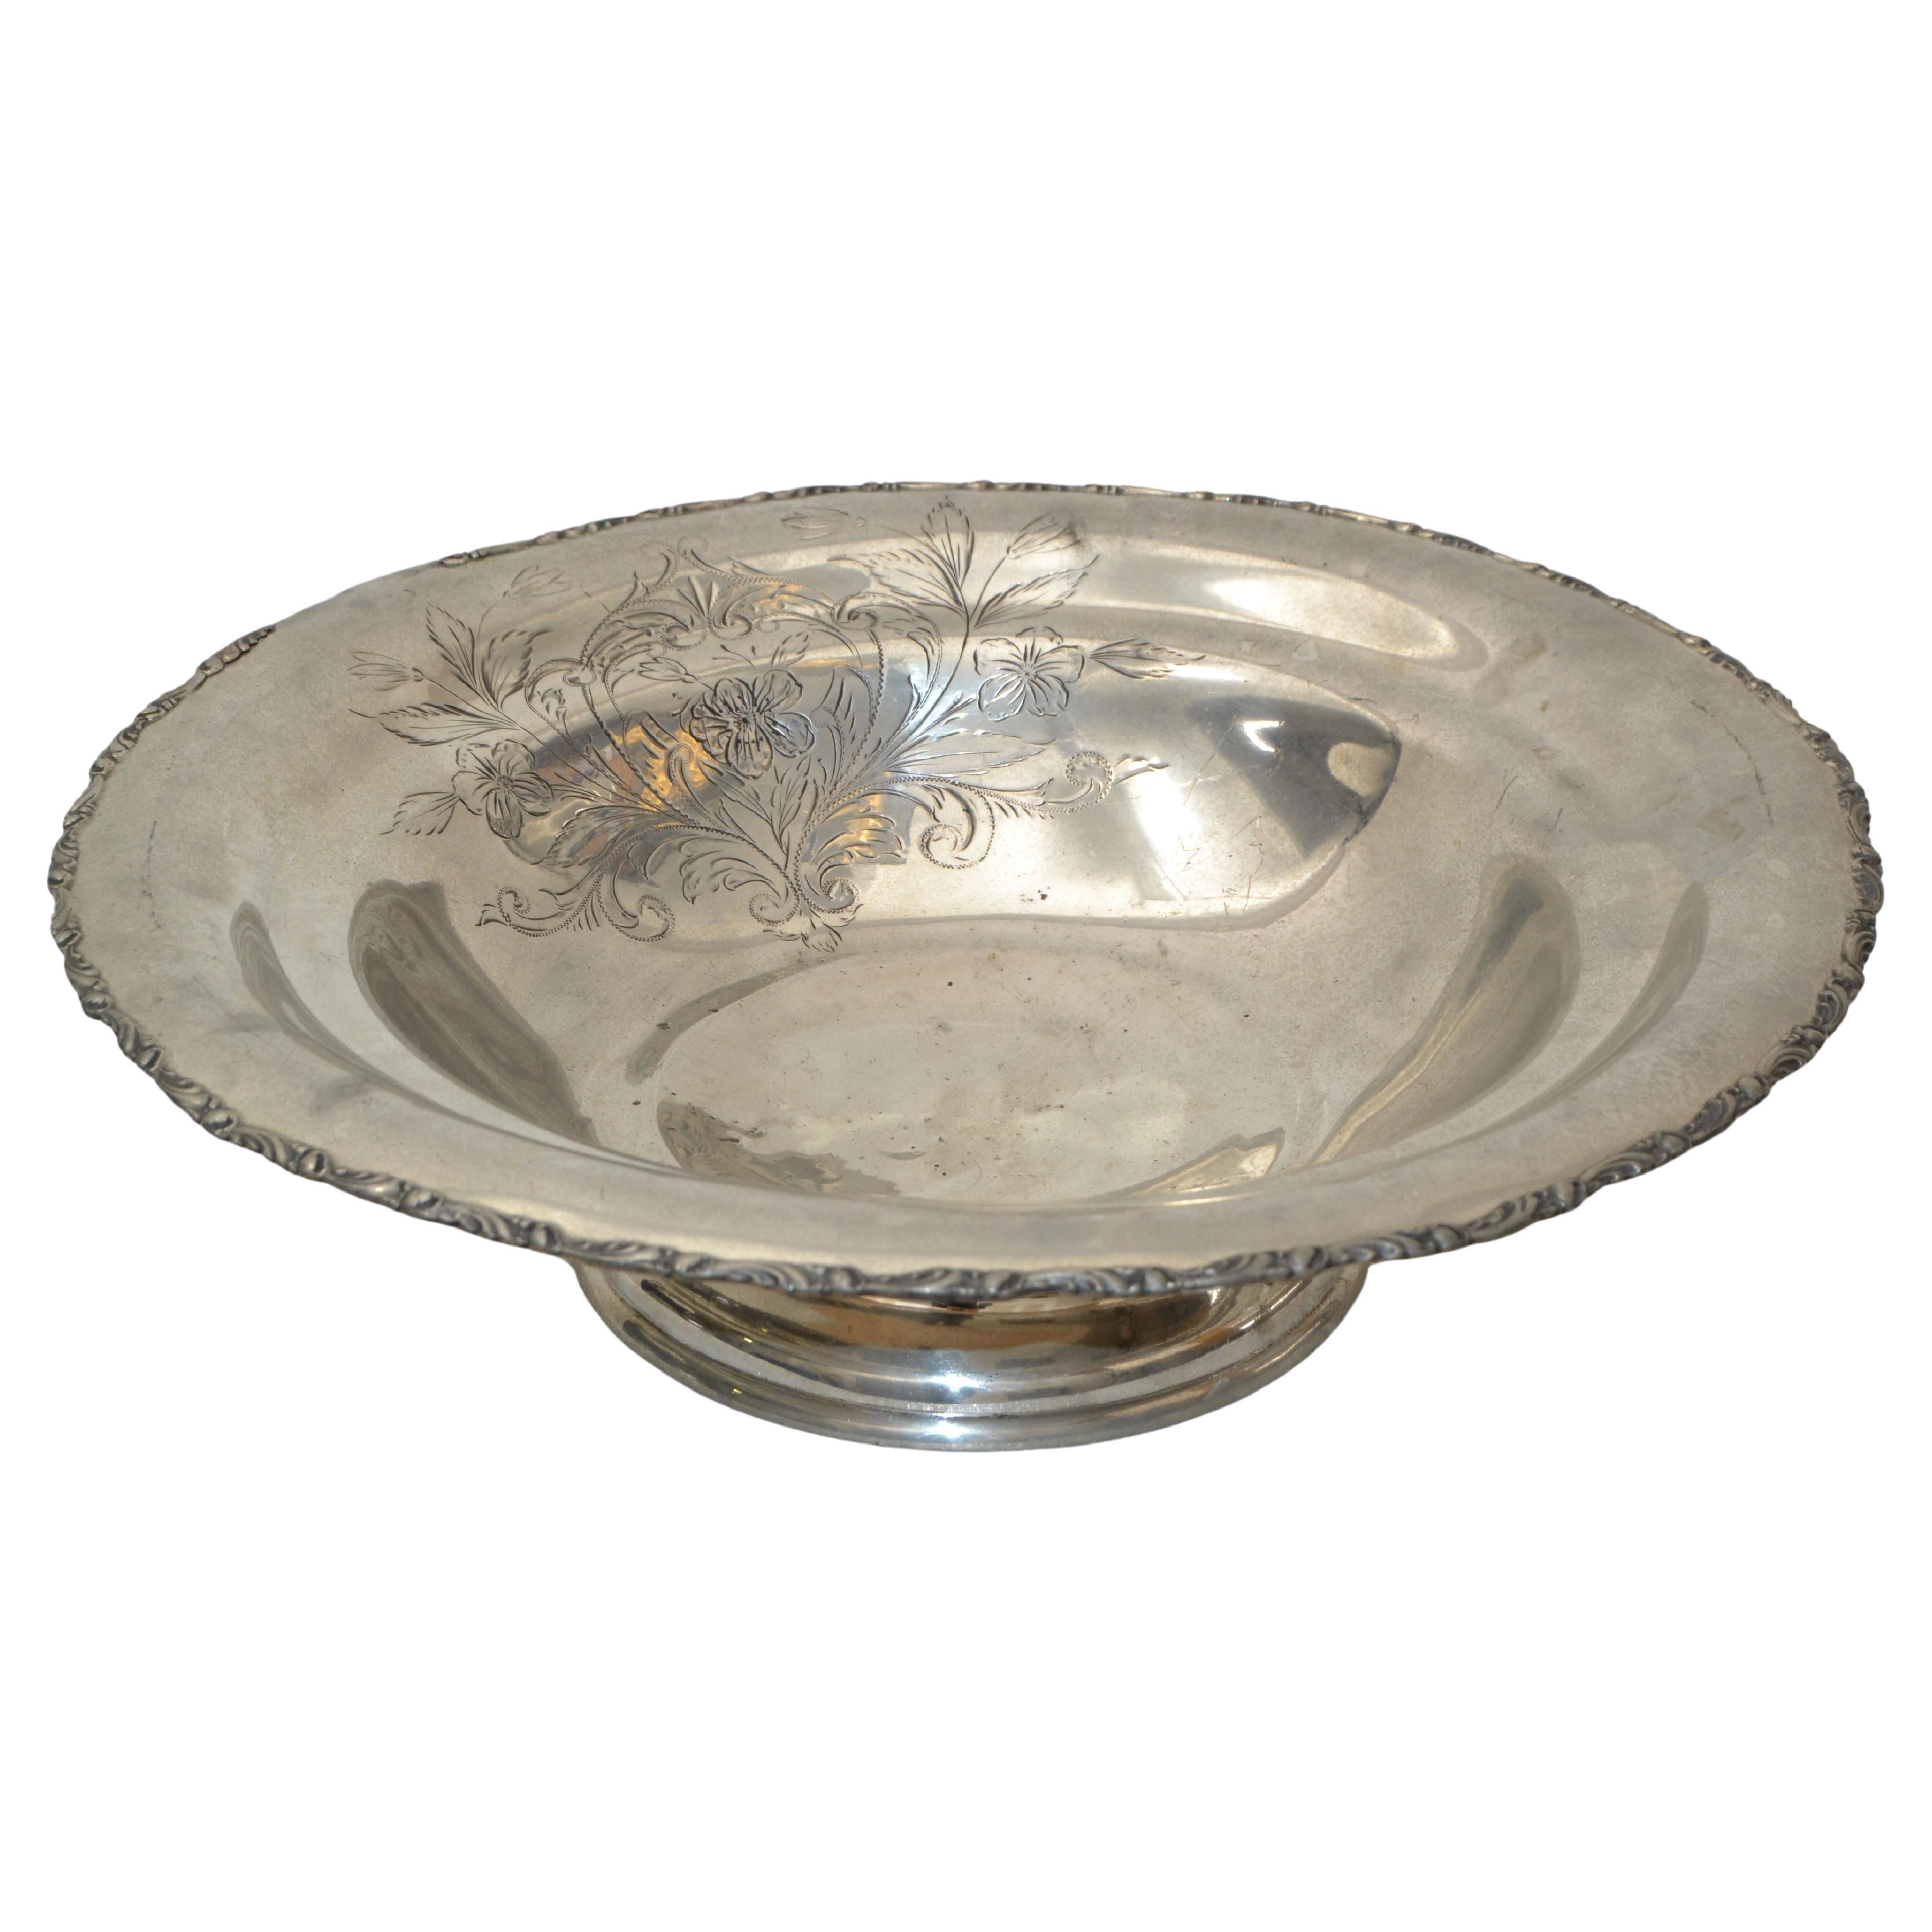 A Silver Plate Trademark Ornate Large Bowl Footed Serving Dish Punch Bowl